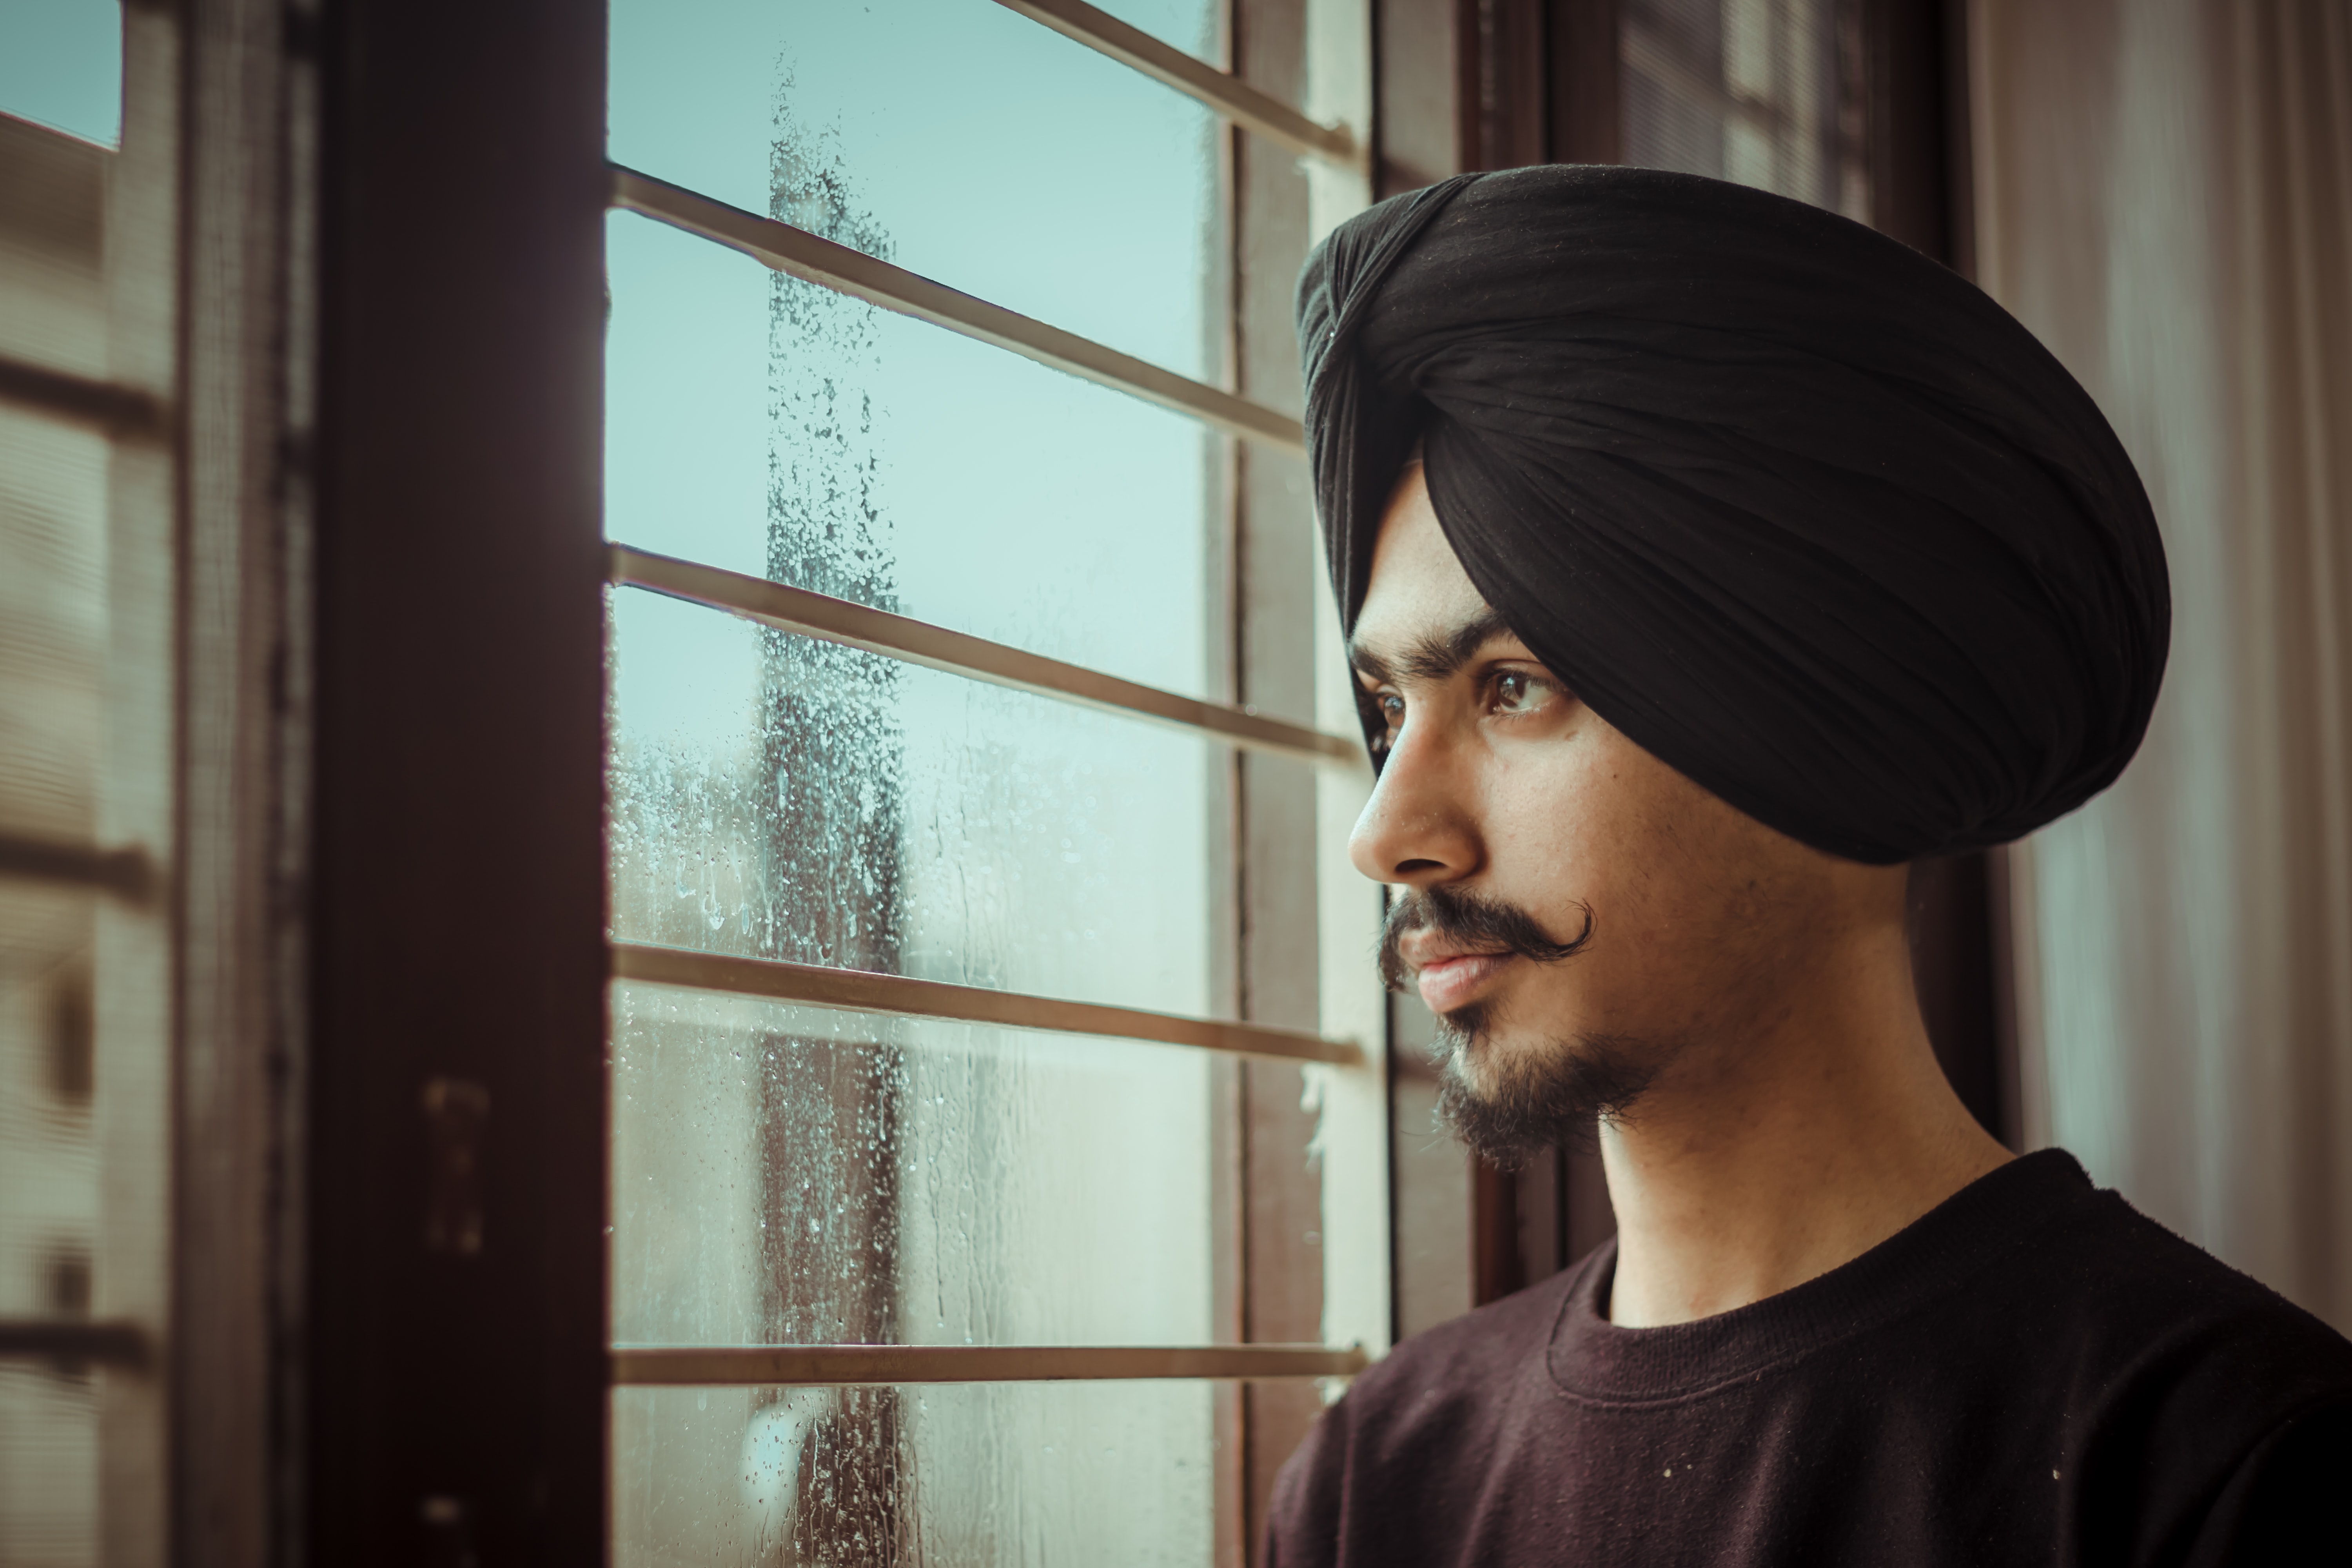 A young man with a moustache wearing a black turban stands next to a window, staring outside solemnly.